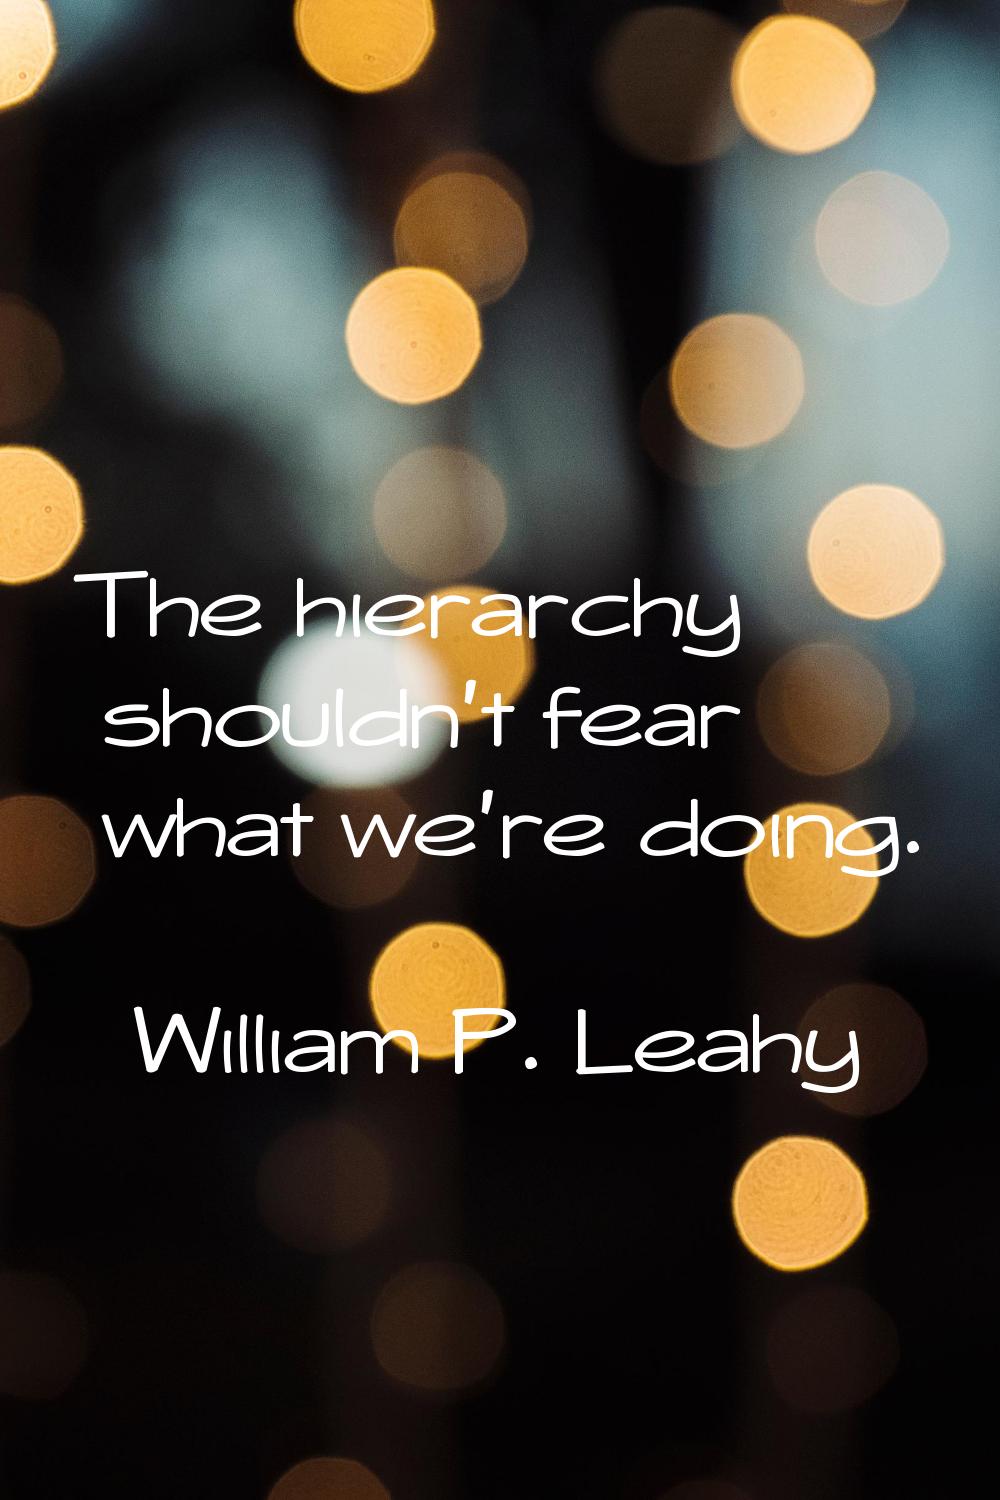 The hierarchy shouldn't fear what we're doing.